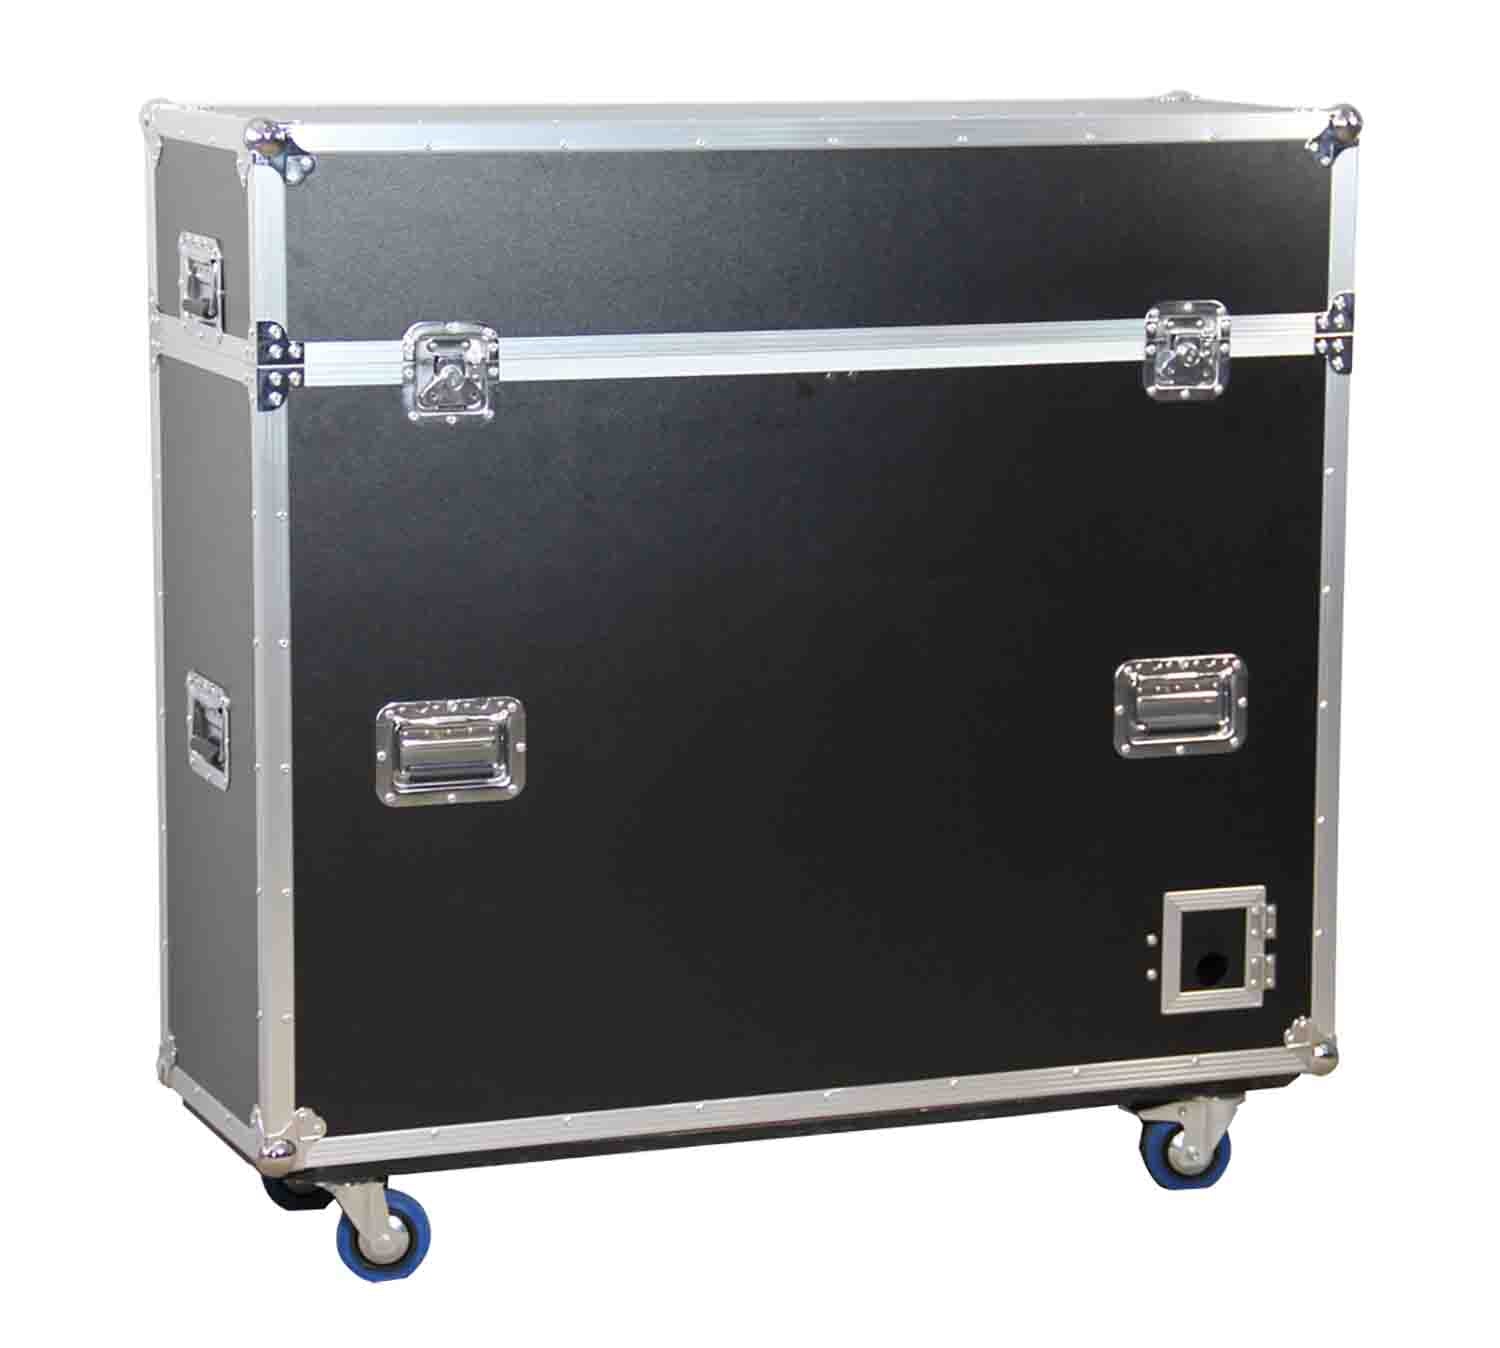 Gator Cases G-TOUR ELIFT 47 Electric Lift Road Case for 47″ LCD or Plasma Screen - Hollywood DJ